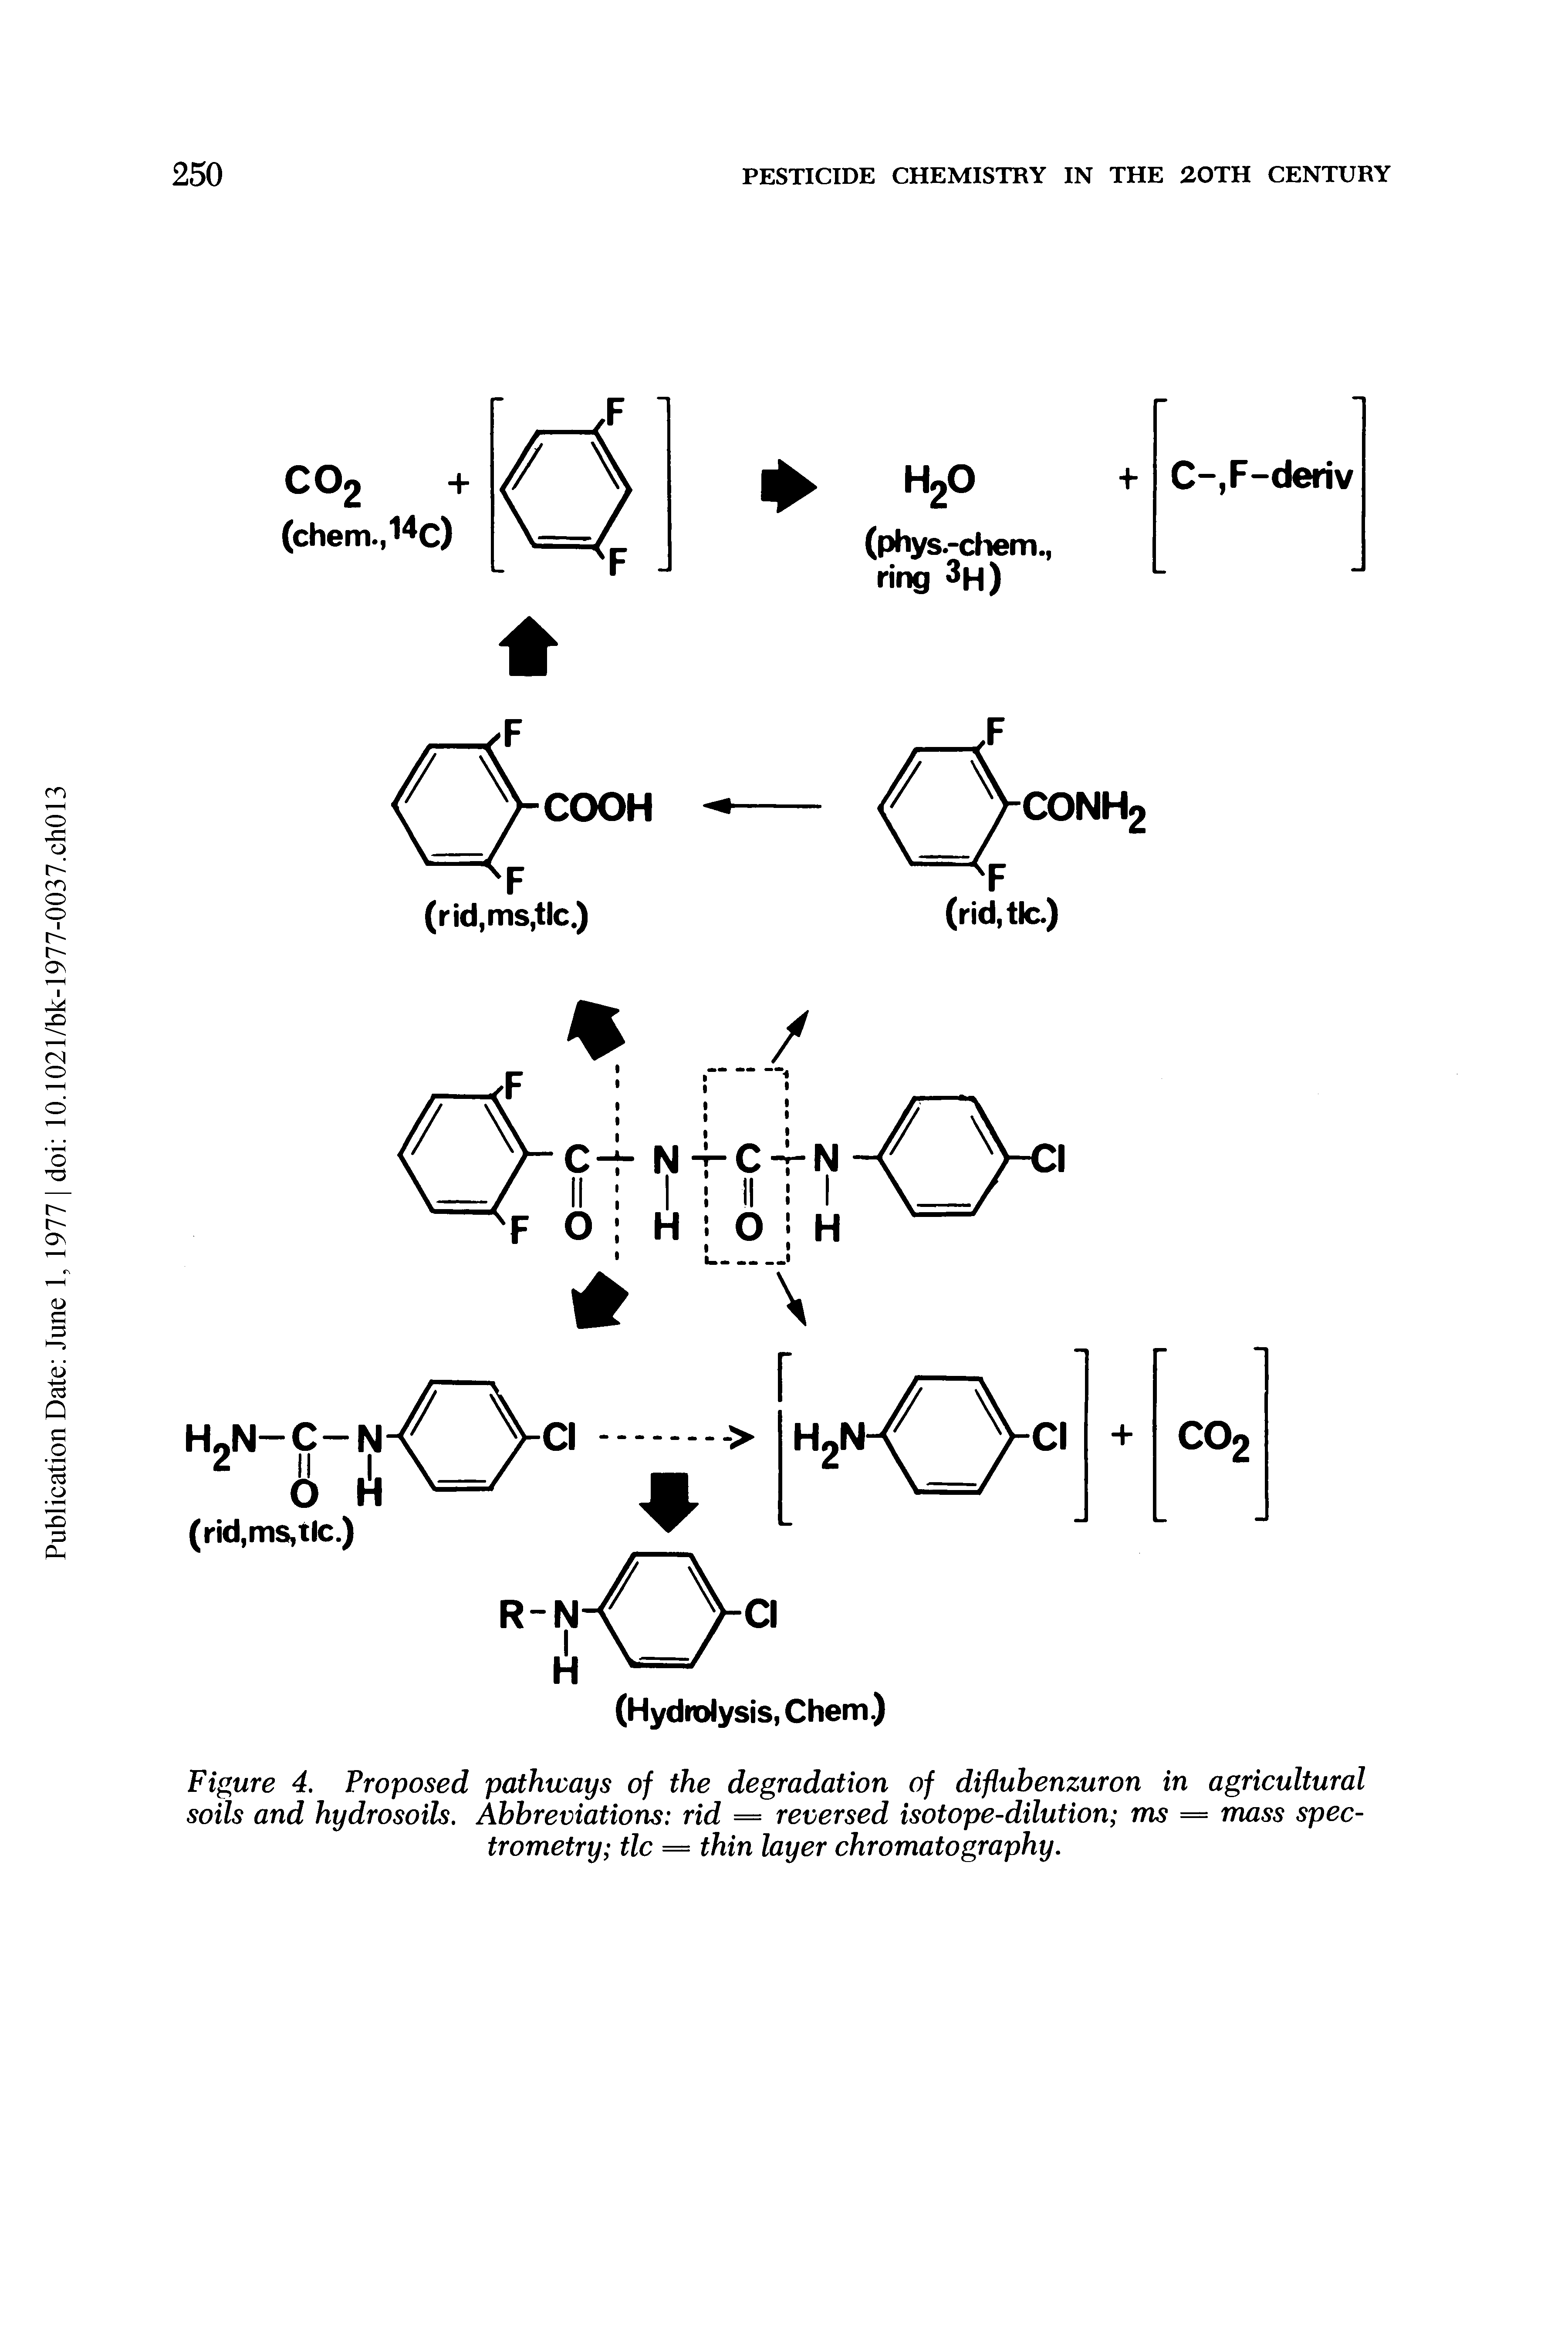 Figure 4. Proposed pathways of the degradation of diflubenzuron in agricultural soils and hydrosoils. Abbreviations rid = reversed isotope-dilution ms = mass spectrometry tic = thin layer chromatography.